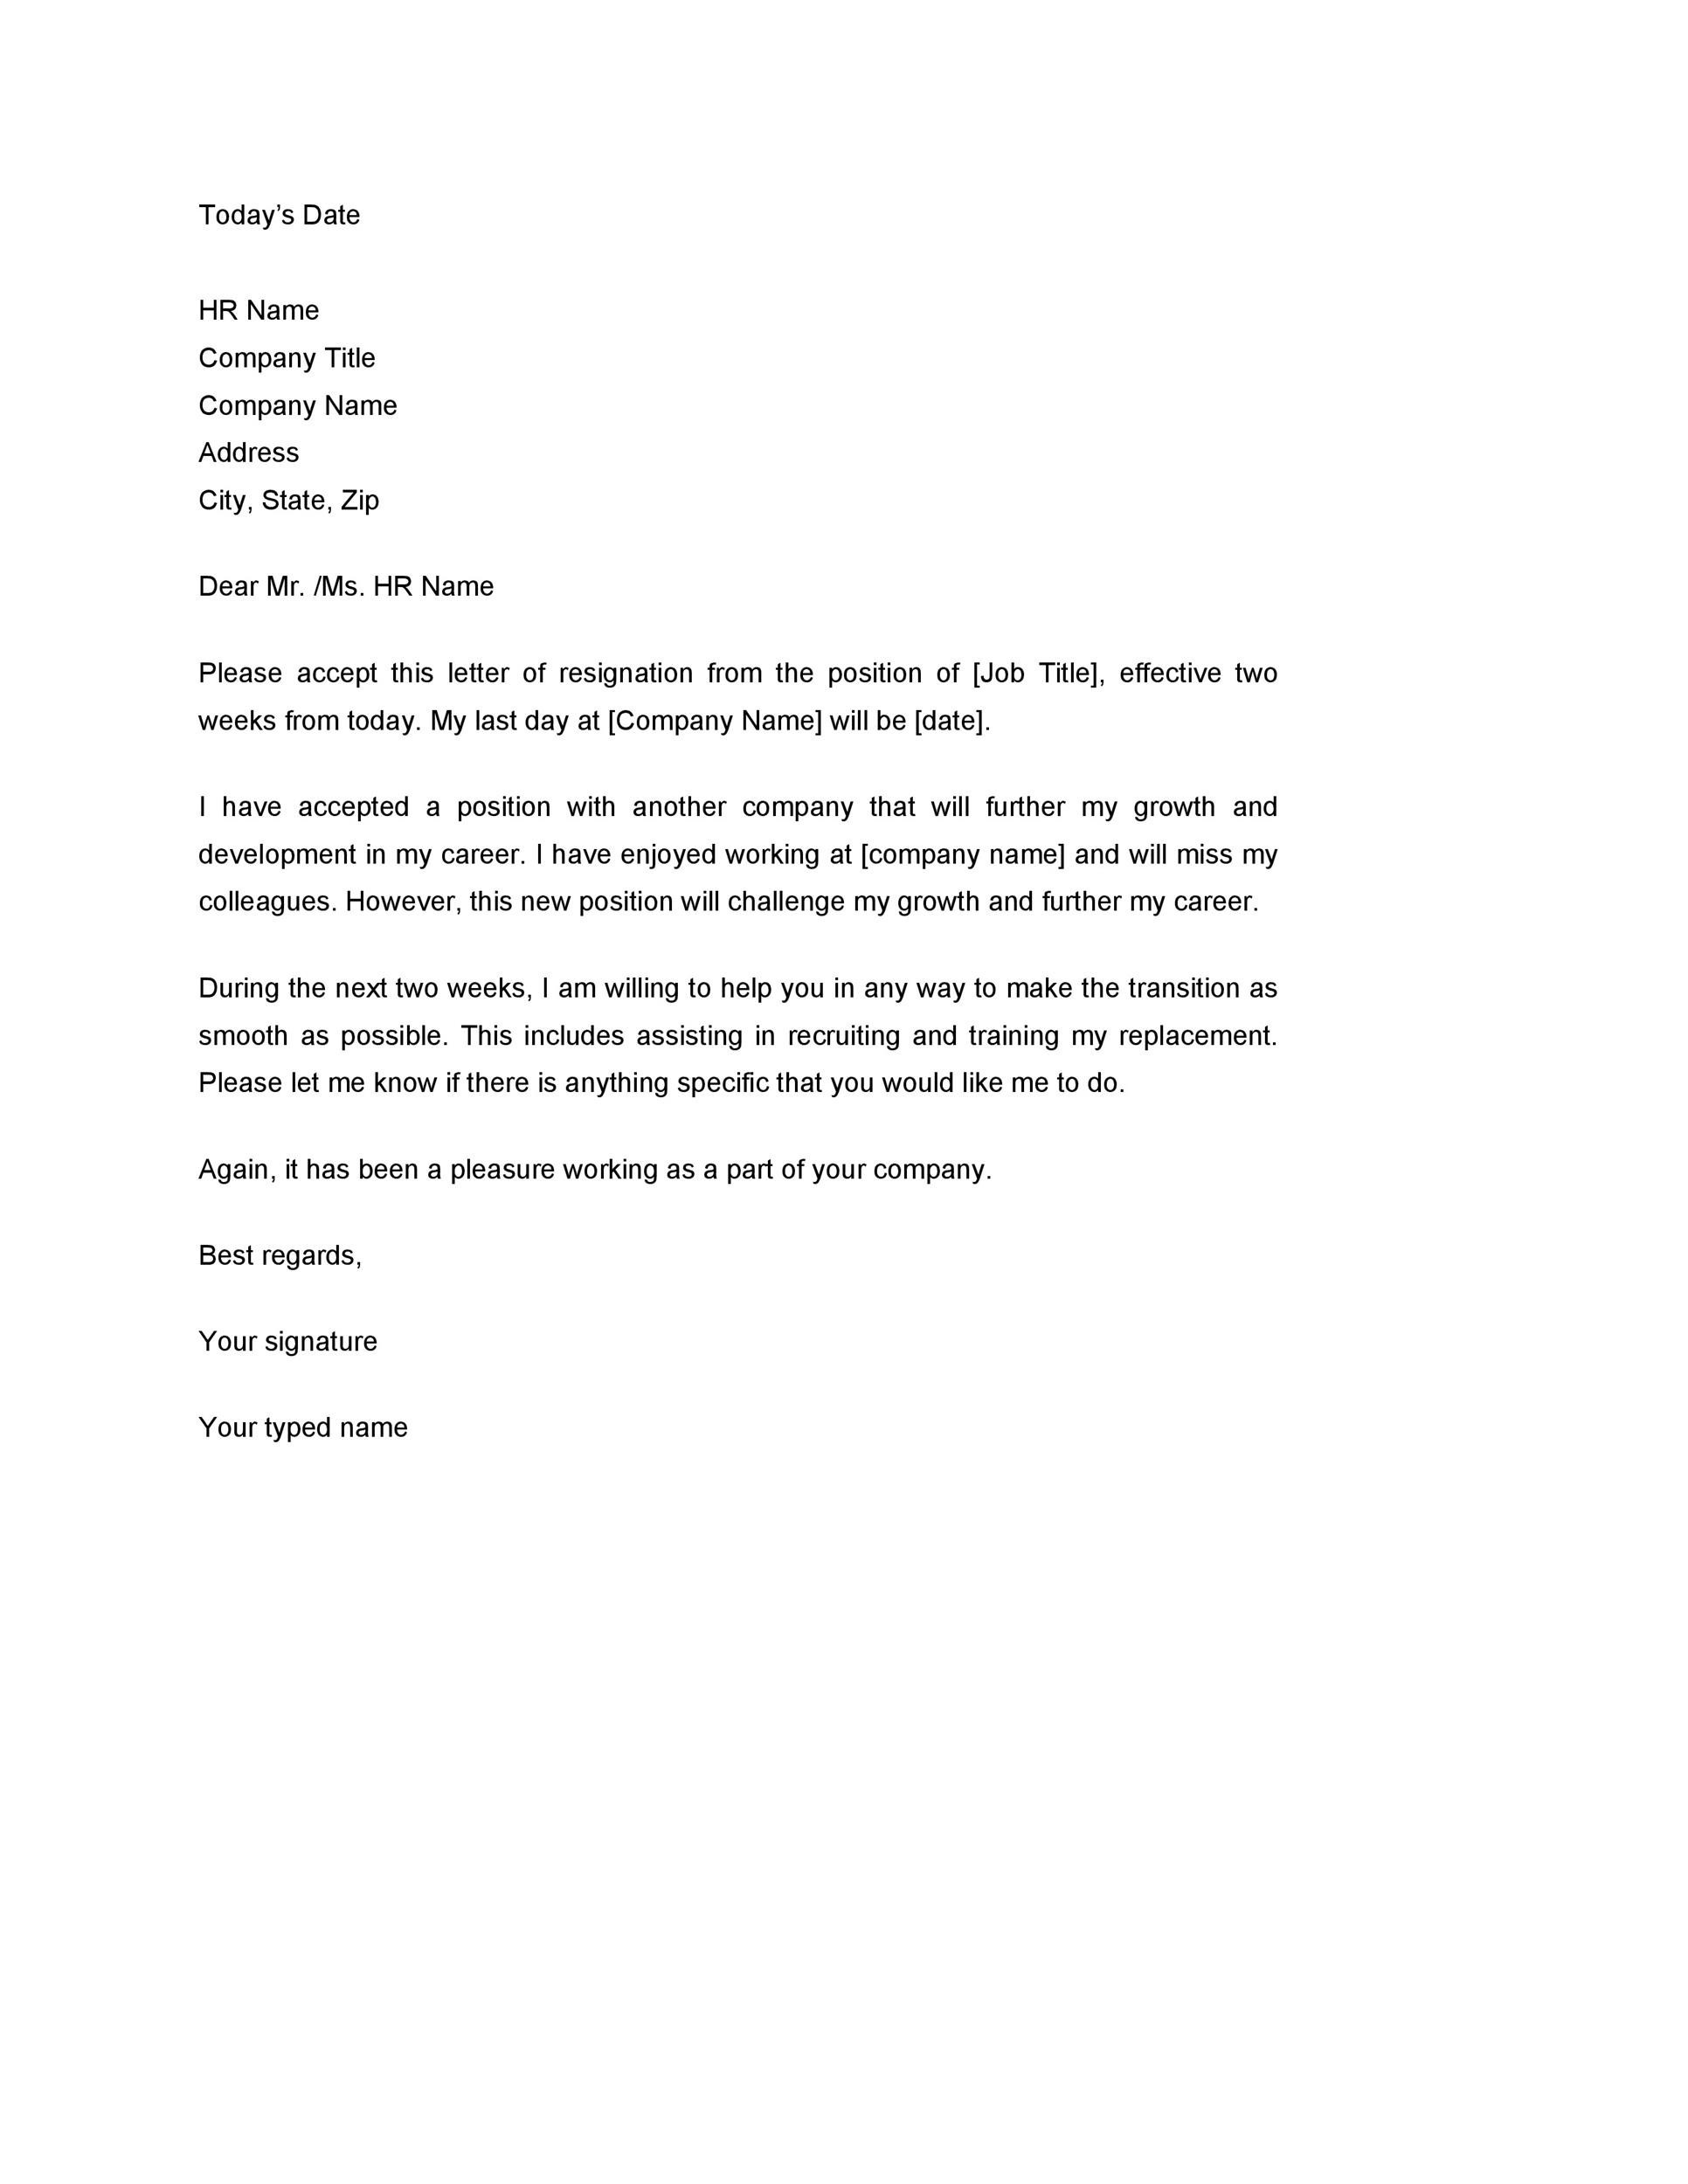 Part Time Resignation Letter from templatelab.com